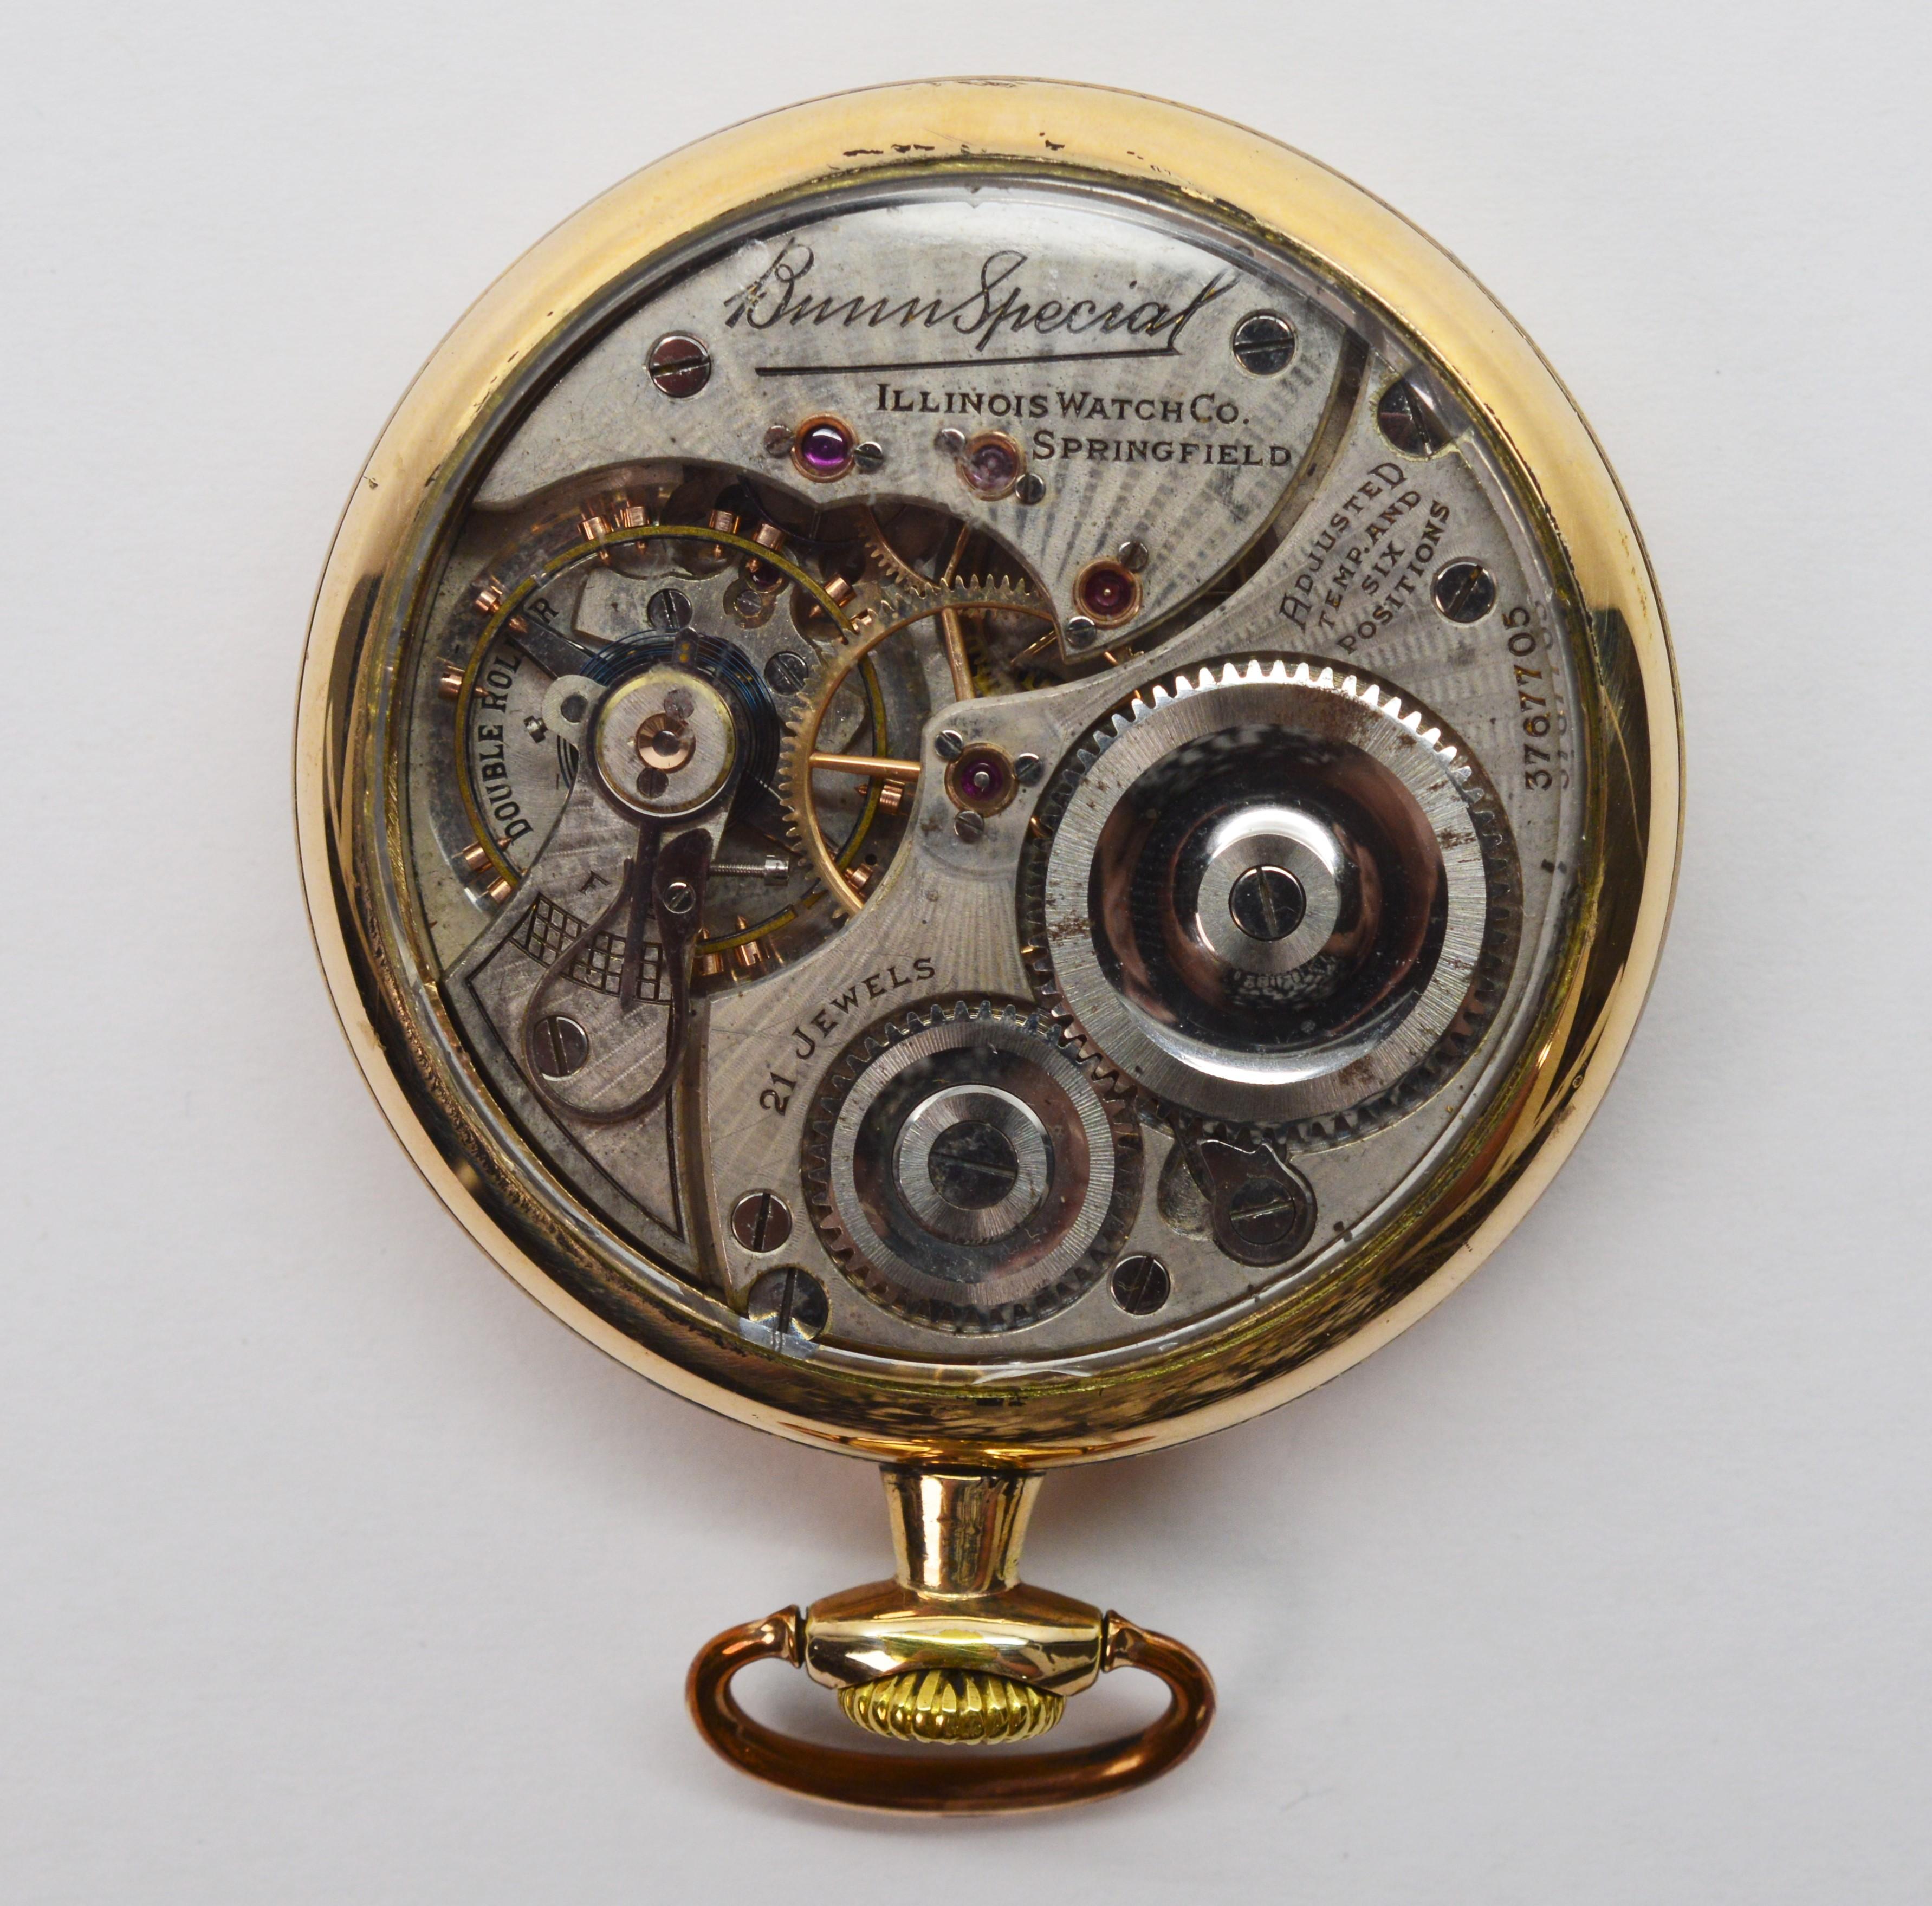 Enjoy seeing the craftsmanship in this Illinois Bunn Special Brass Pocket Watch expertly restored with a unique display back allowing the intricate parts of this time piece to be viewed. Number 3767705. Circa 1920, measuring 49 millimeters. Twenty